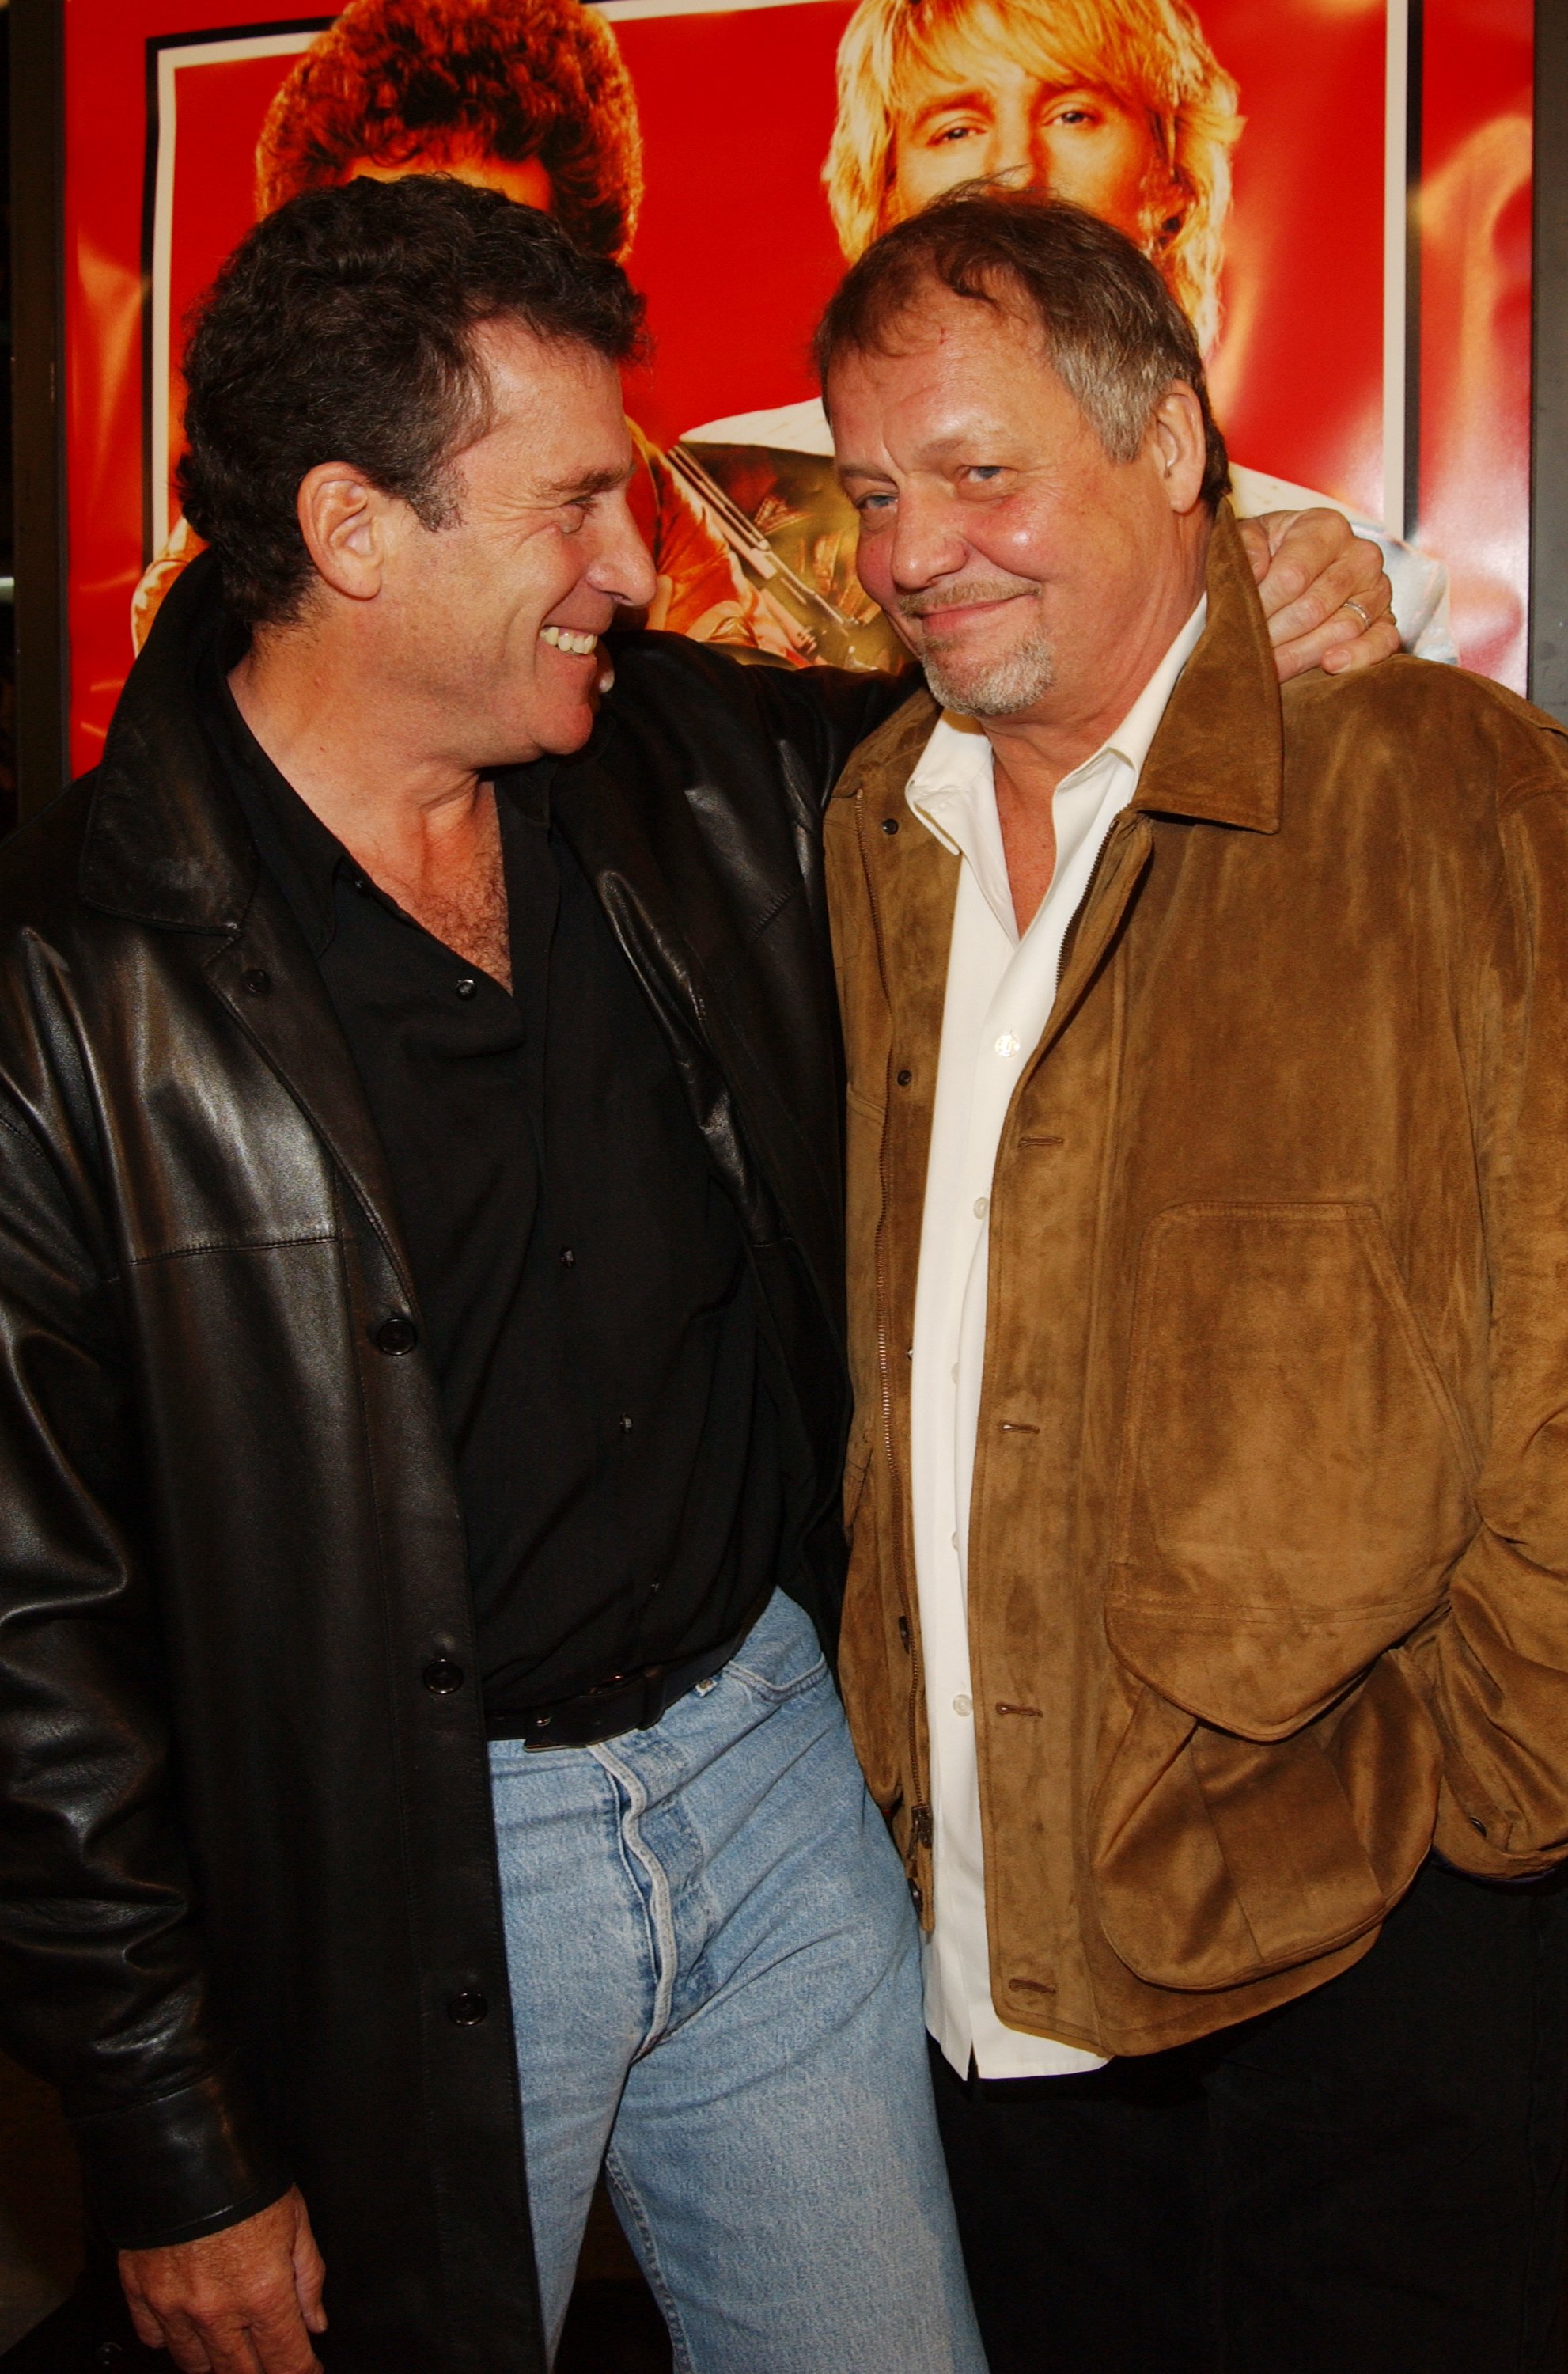 Paul Michael Glaser and David Soul at "Starsky & Hutch" World Premiere in Westwood, California, United States on February 26, 2004| Source: Getty Images